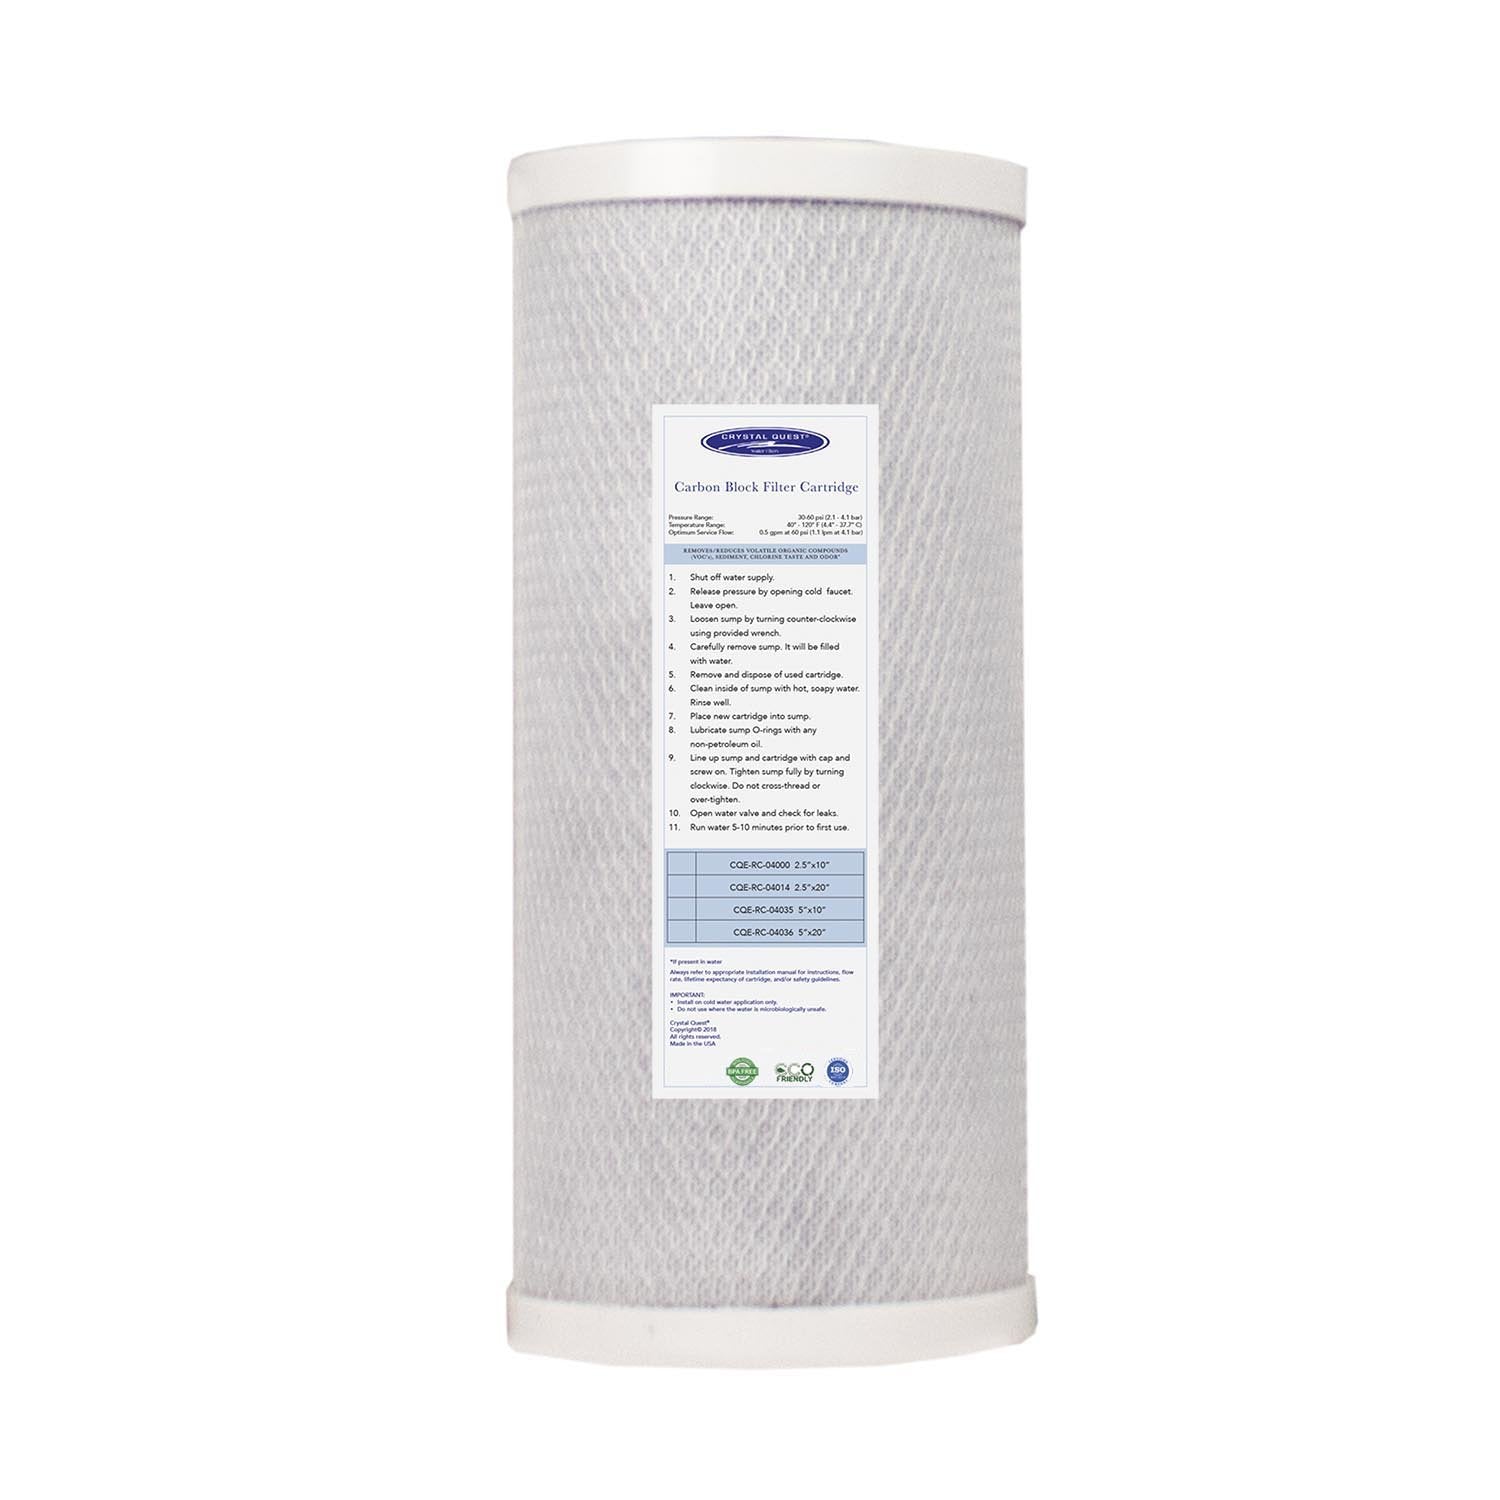 4-5/8" x 9-3/4" Coconut Based 5-Micron Carbon Block Filter Cartridge - Water Filter Cartridges - Crystal Quest